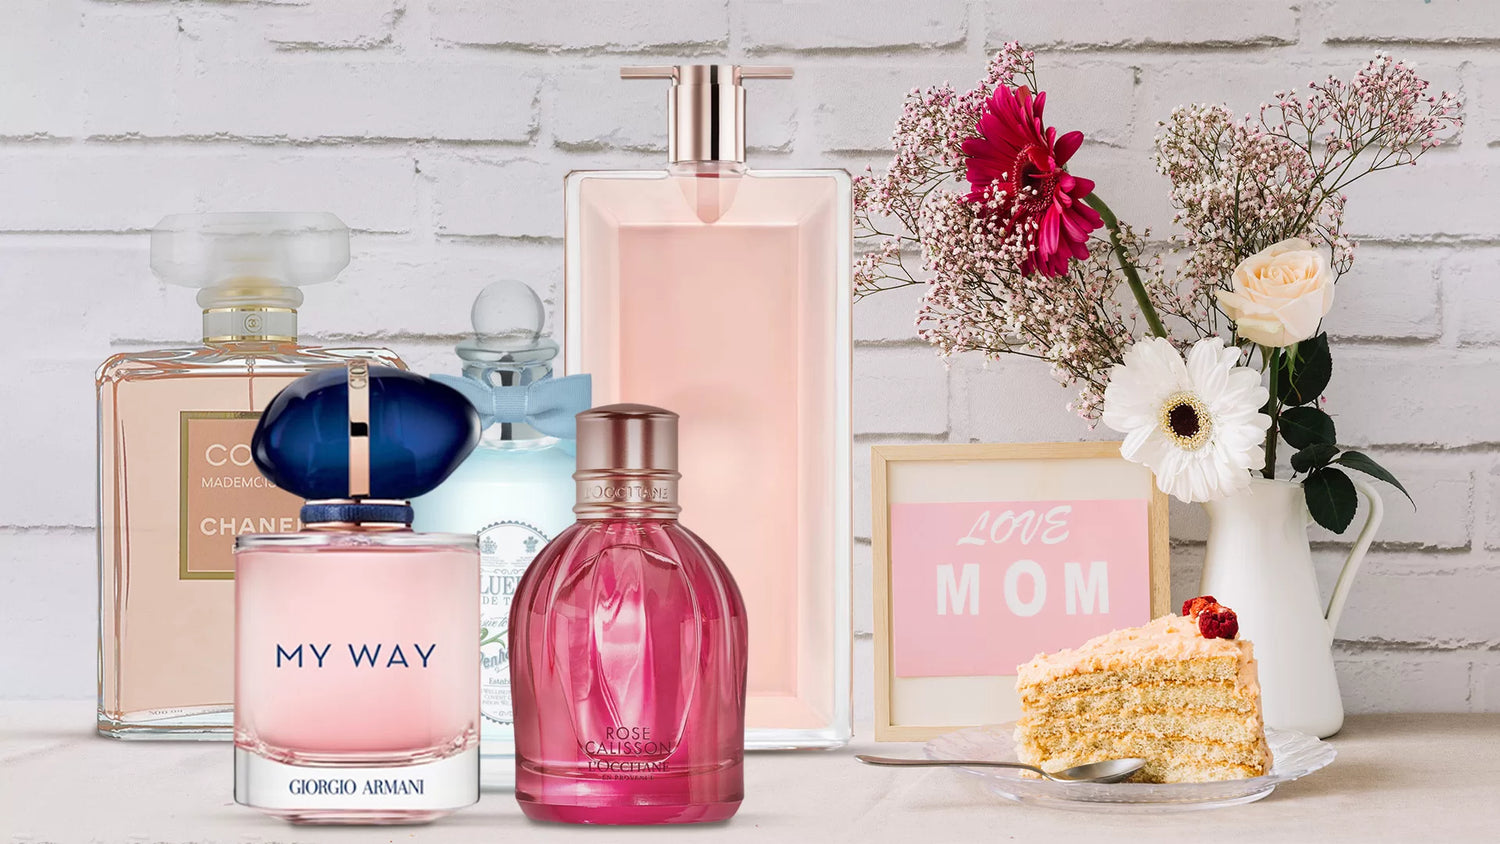 Mothers day sale on all the perfumes at THE PERFUME WORLD